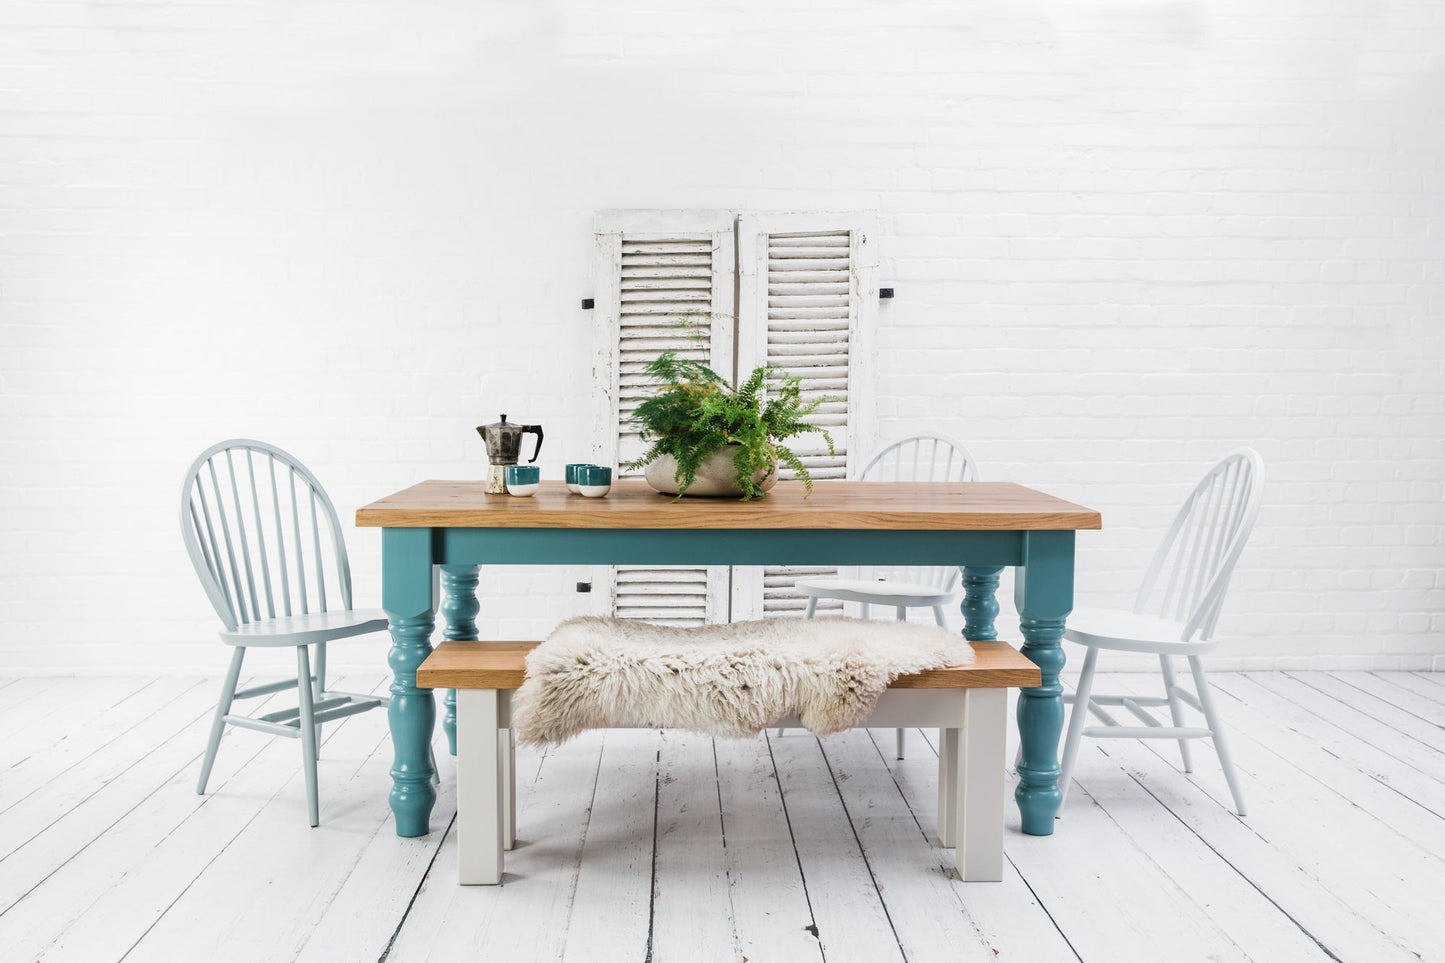 Different Types of Farmhouse Tables to Fit Your Home Décor